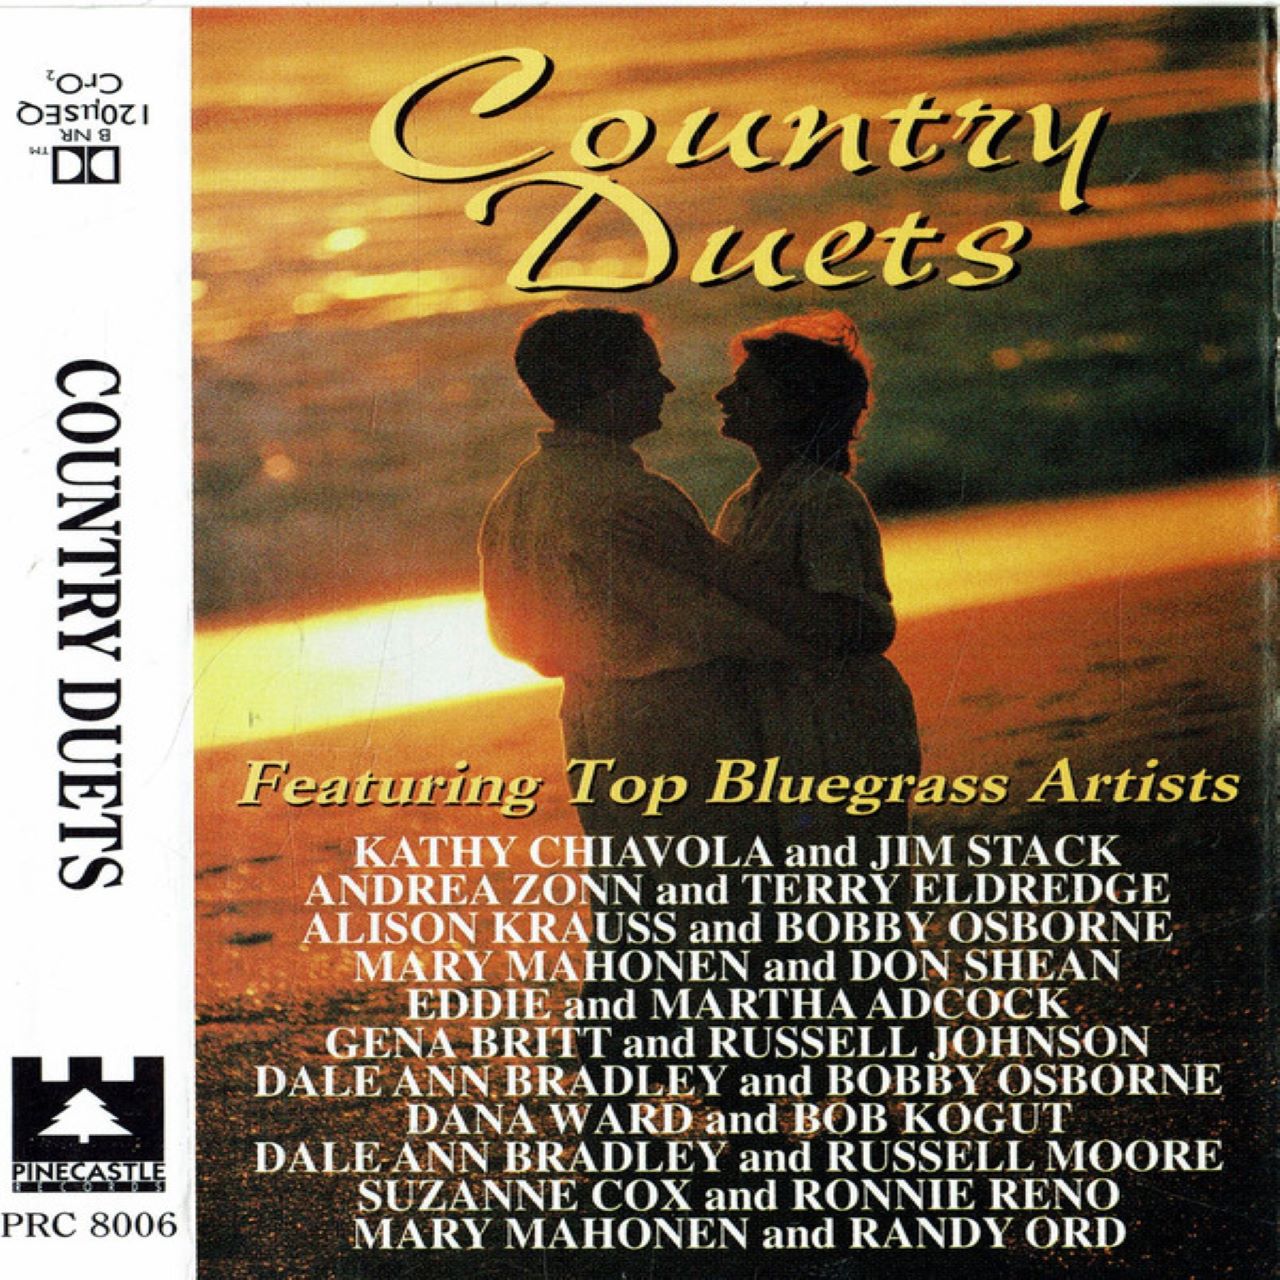 A.A.V.V. - Country Duets Featuring Top Bluegrass Artists cover album